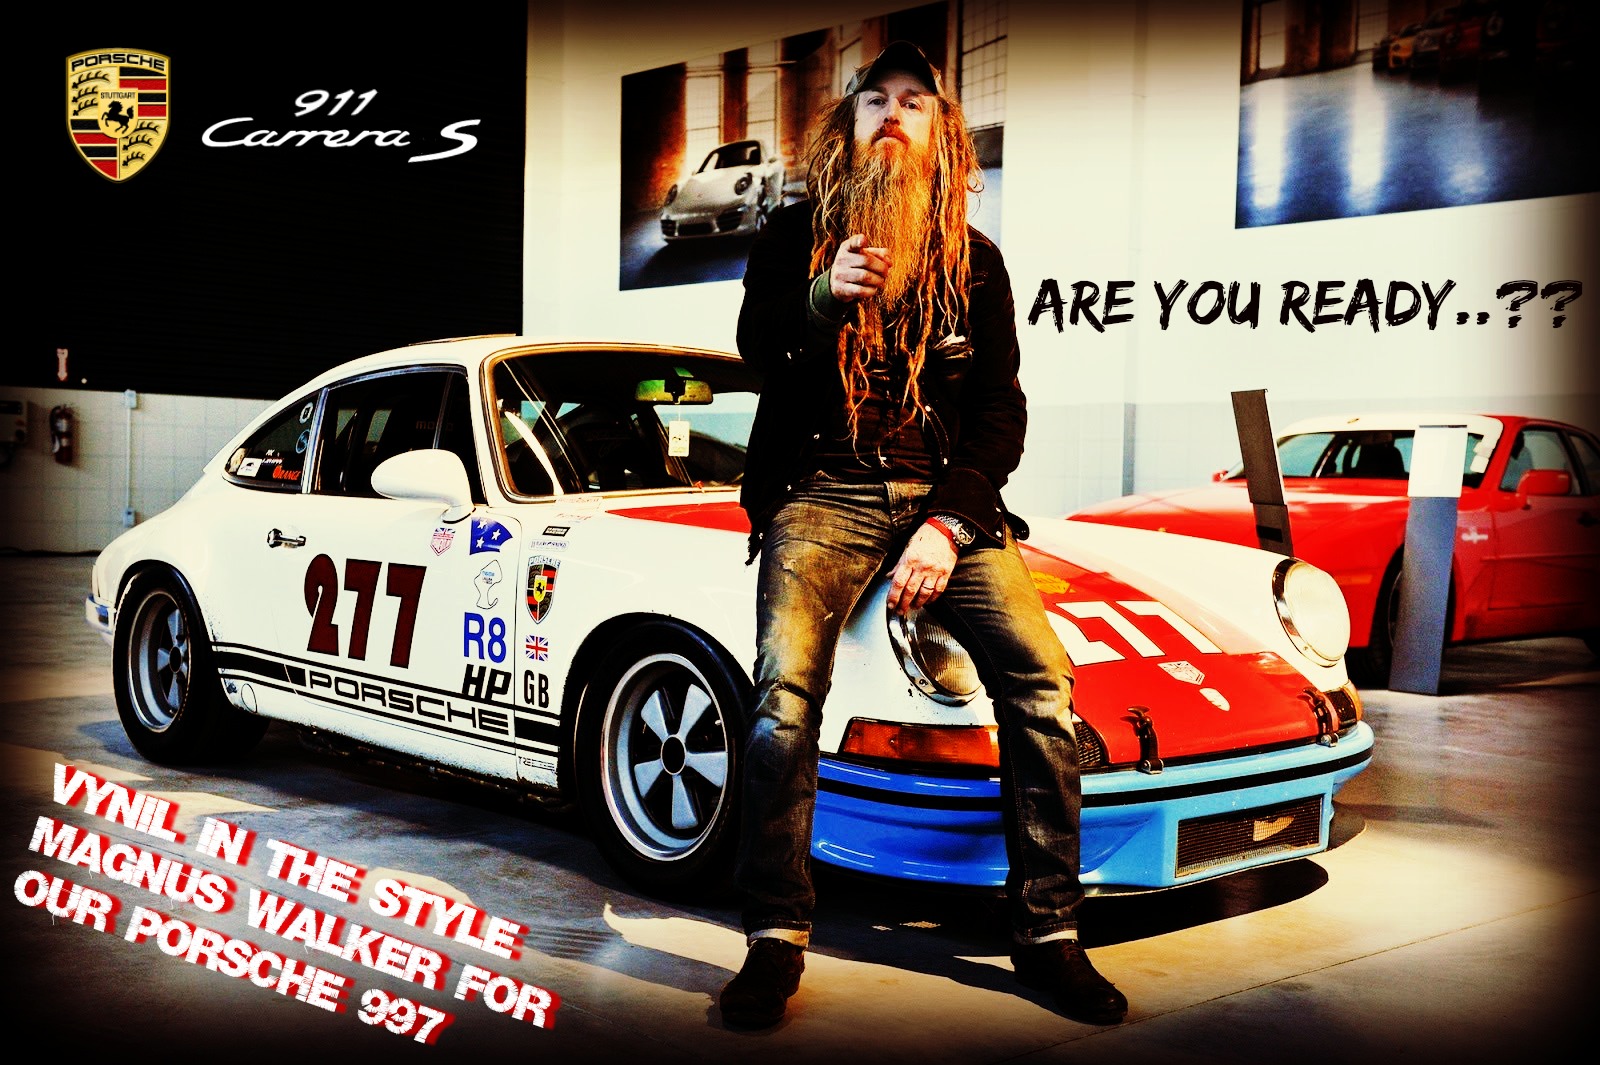 Need For Speed Most Wanted Magnus Walker Style in Vynil for Porsche 911 Carrera S [997]